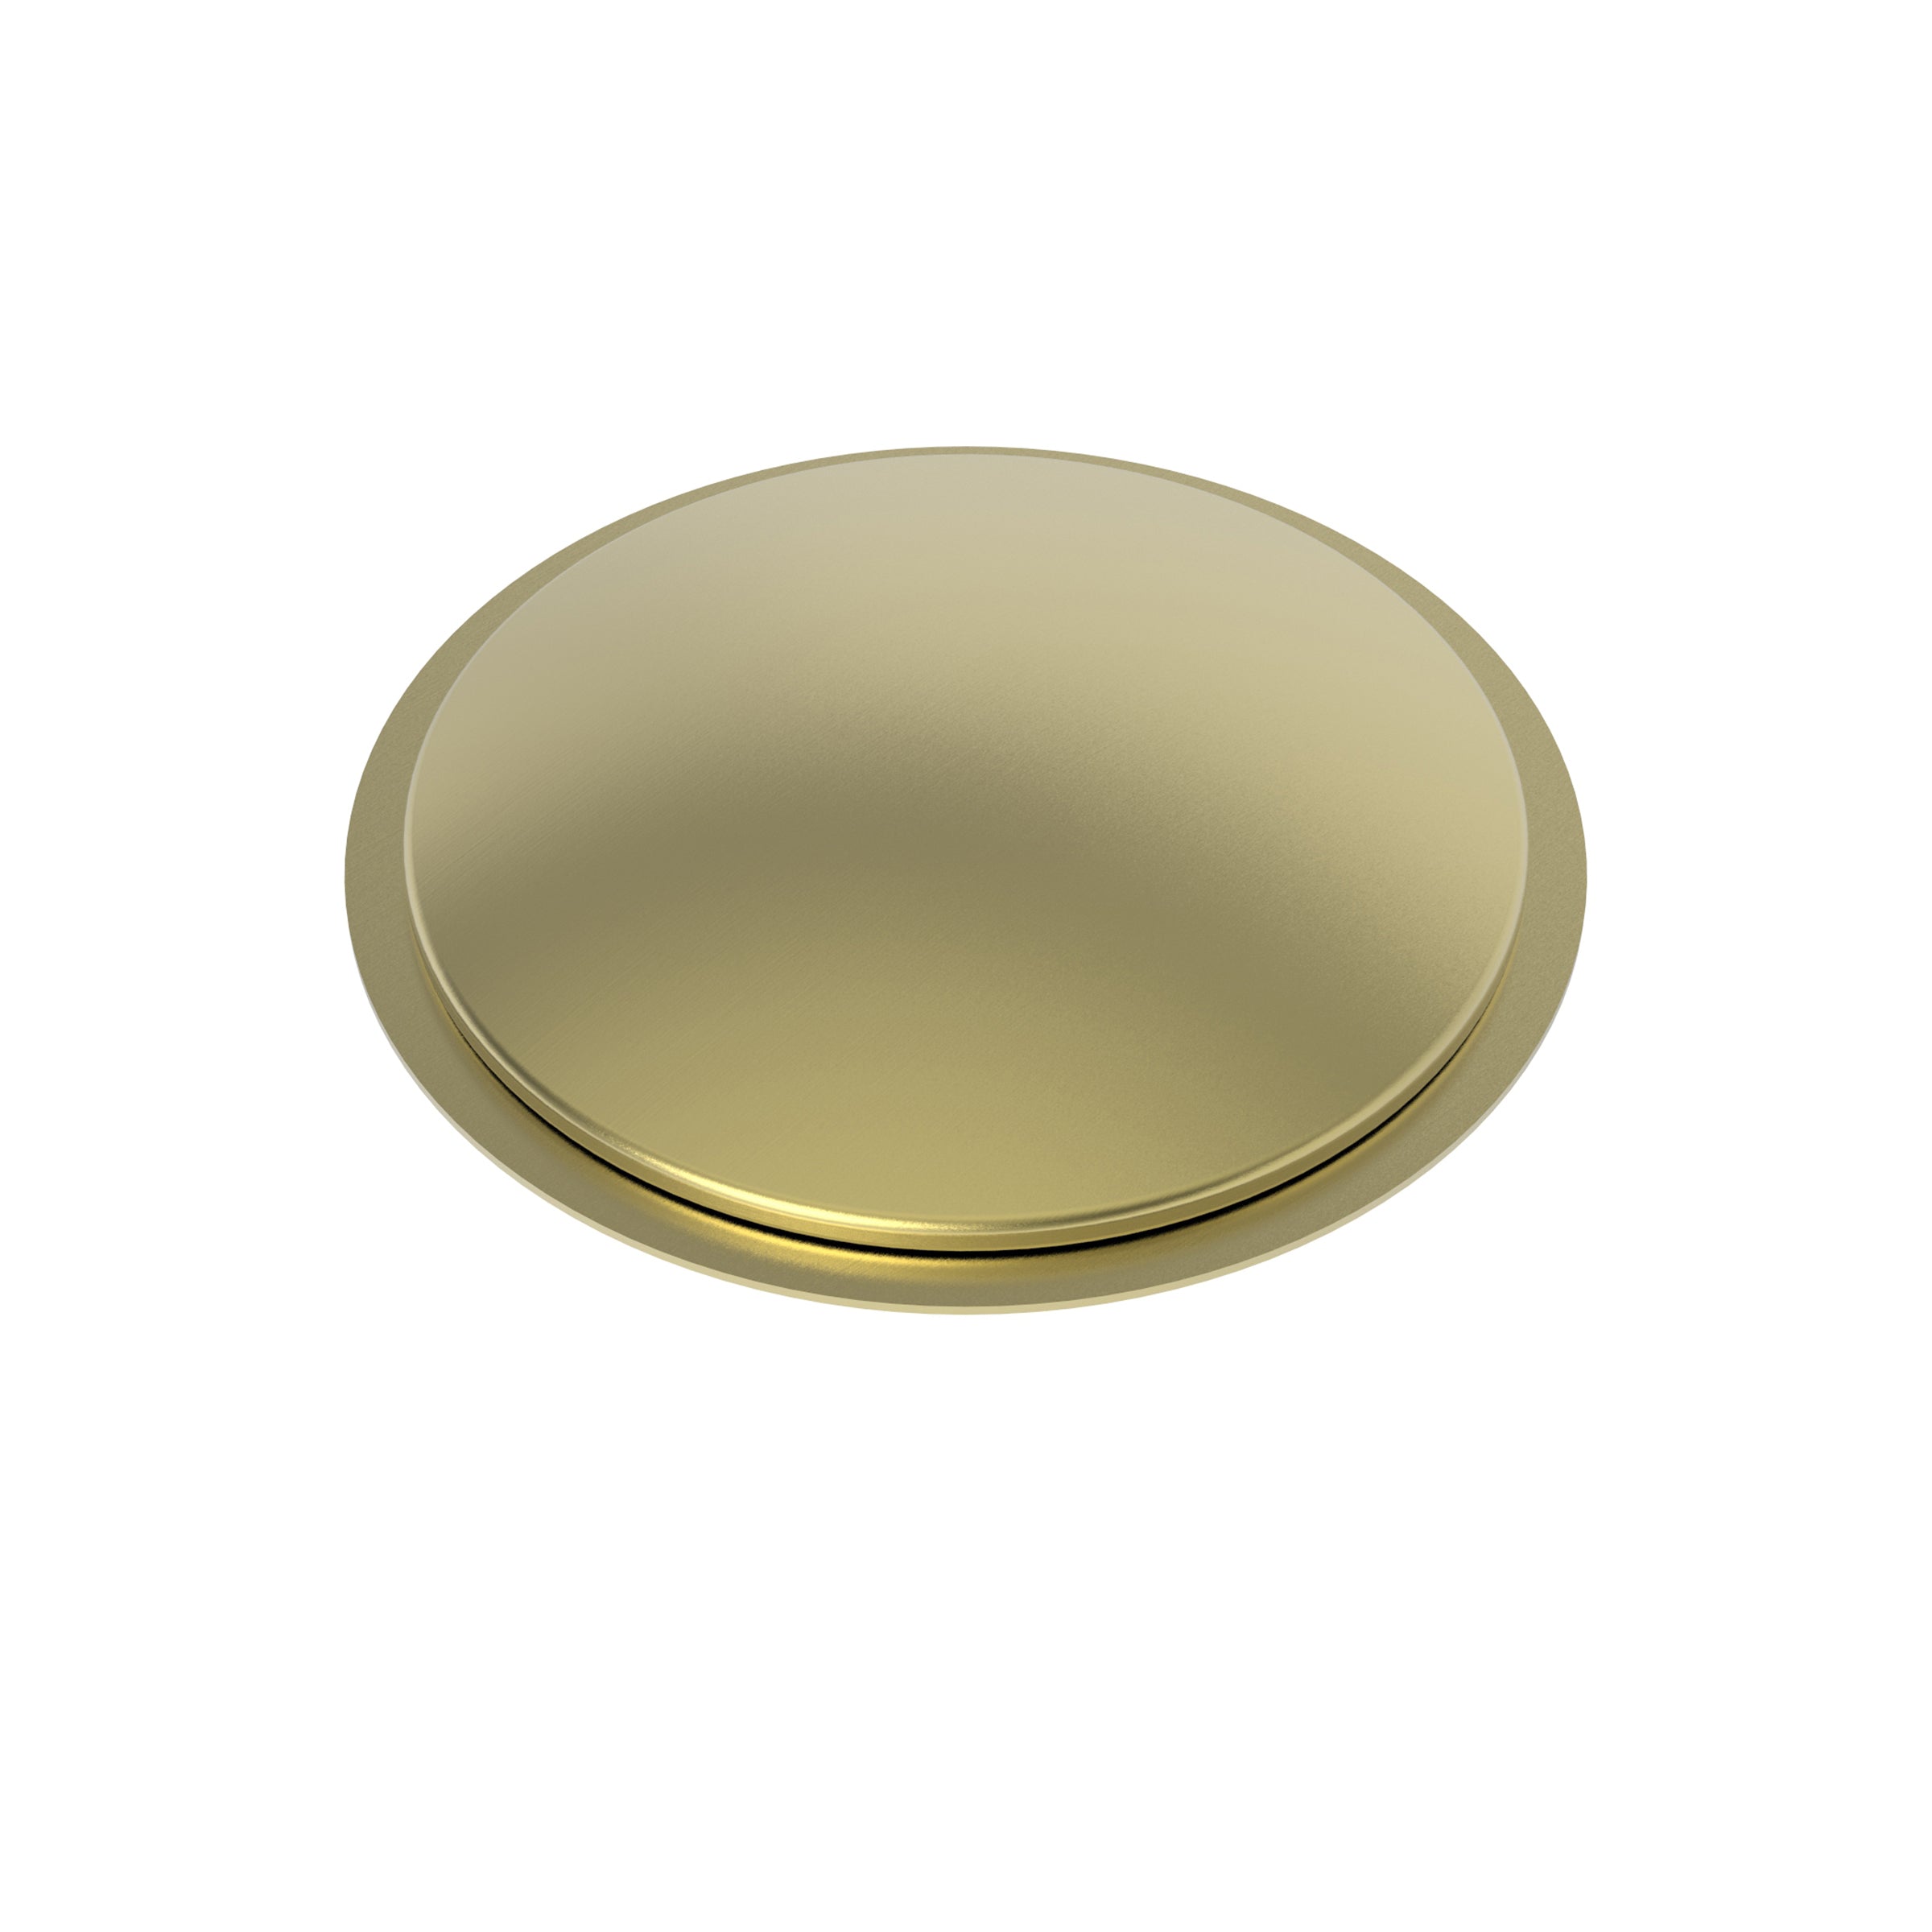 Newport Brass East Linear Faucet Hole Cover